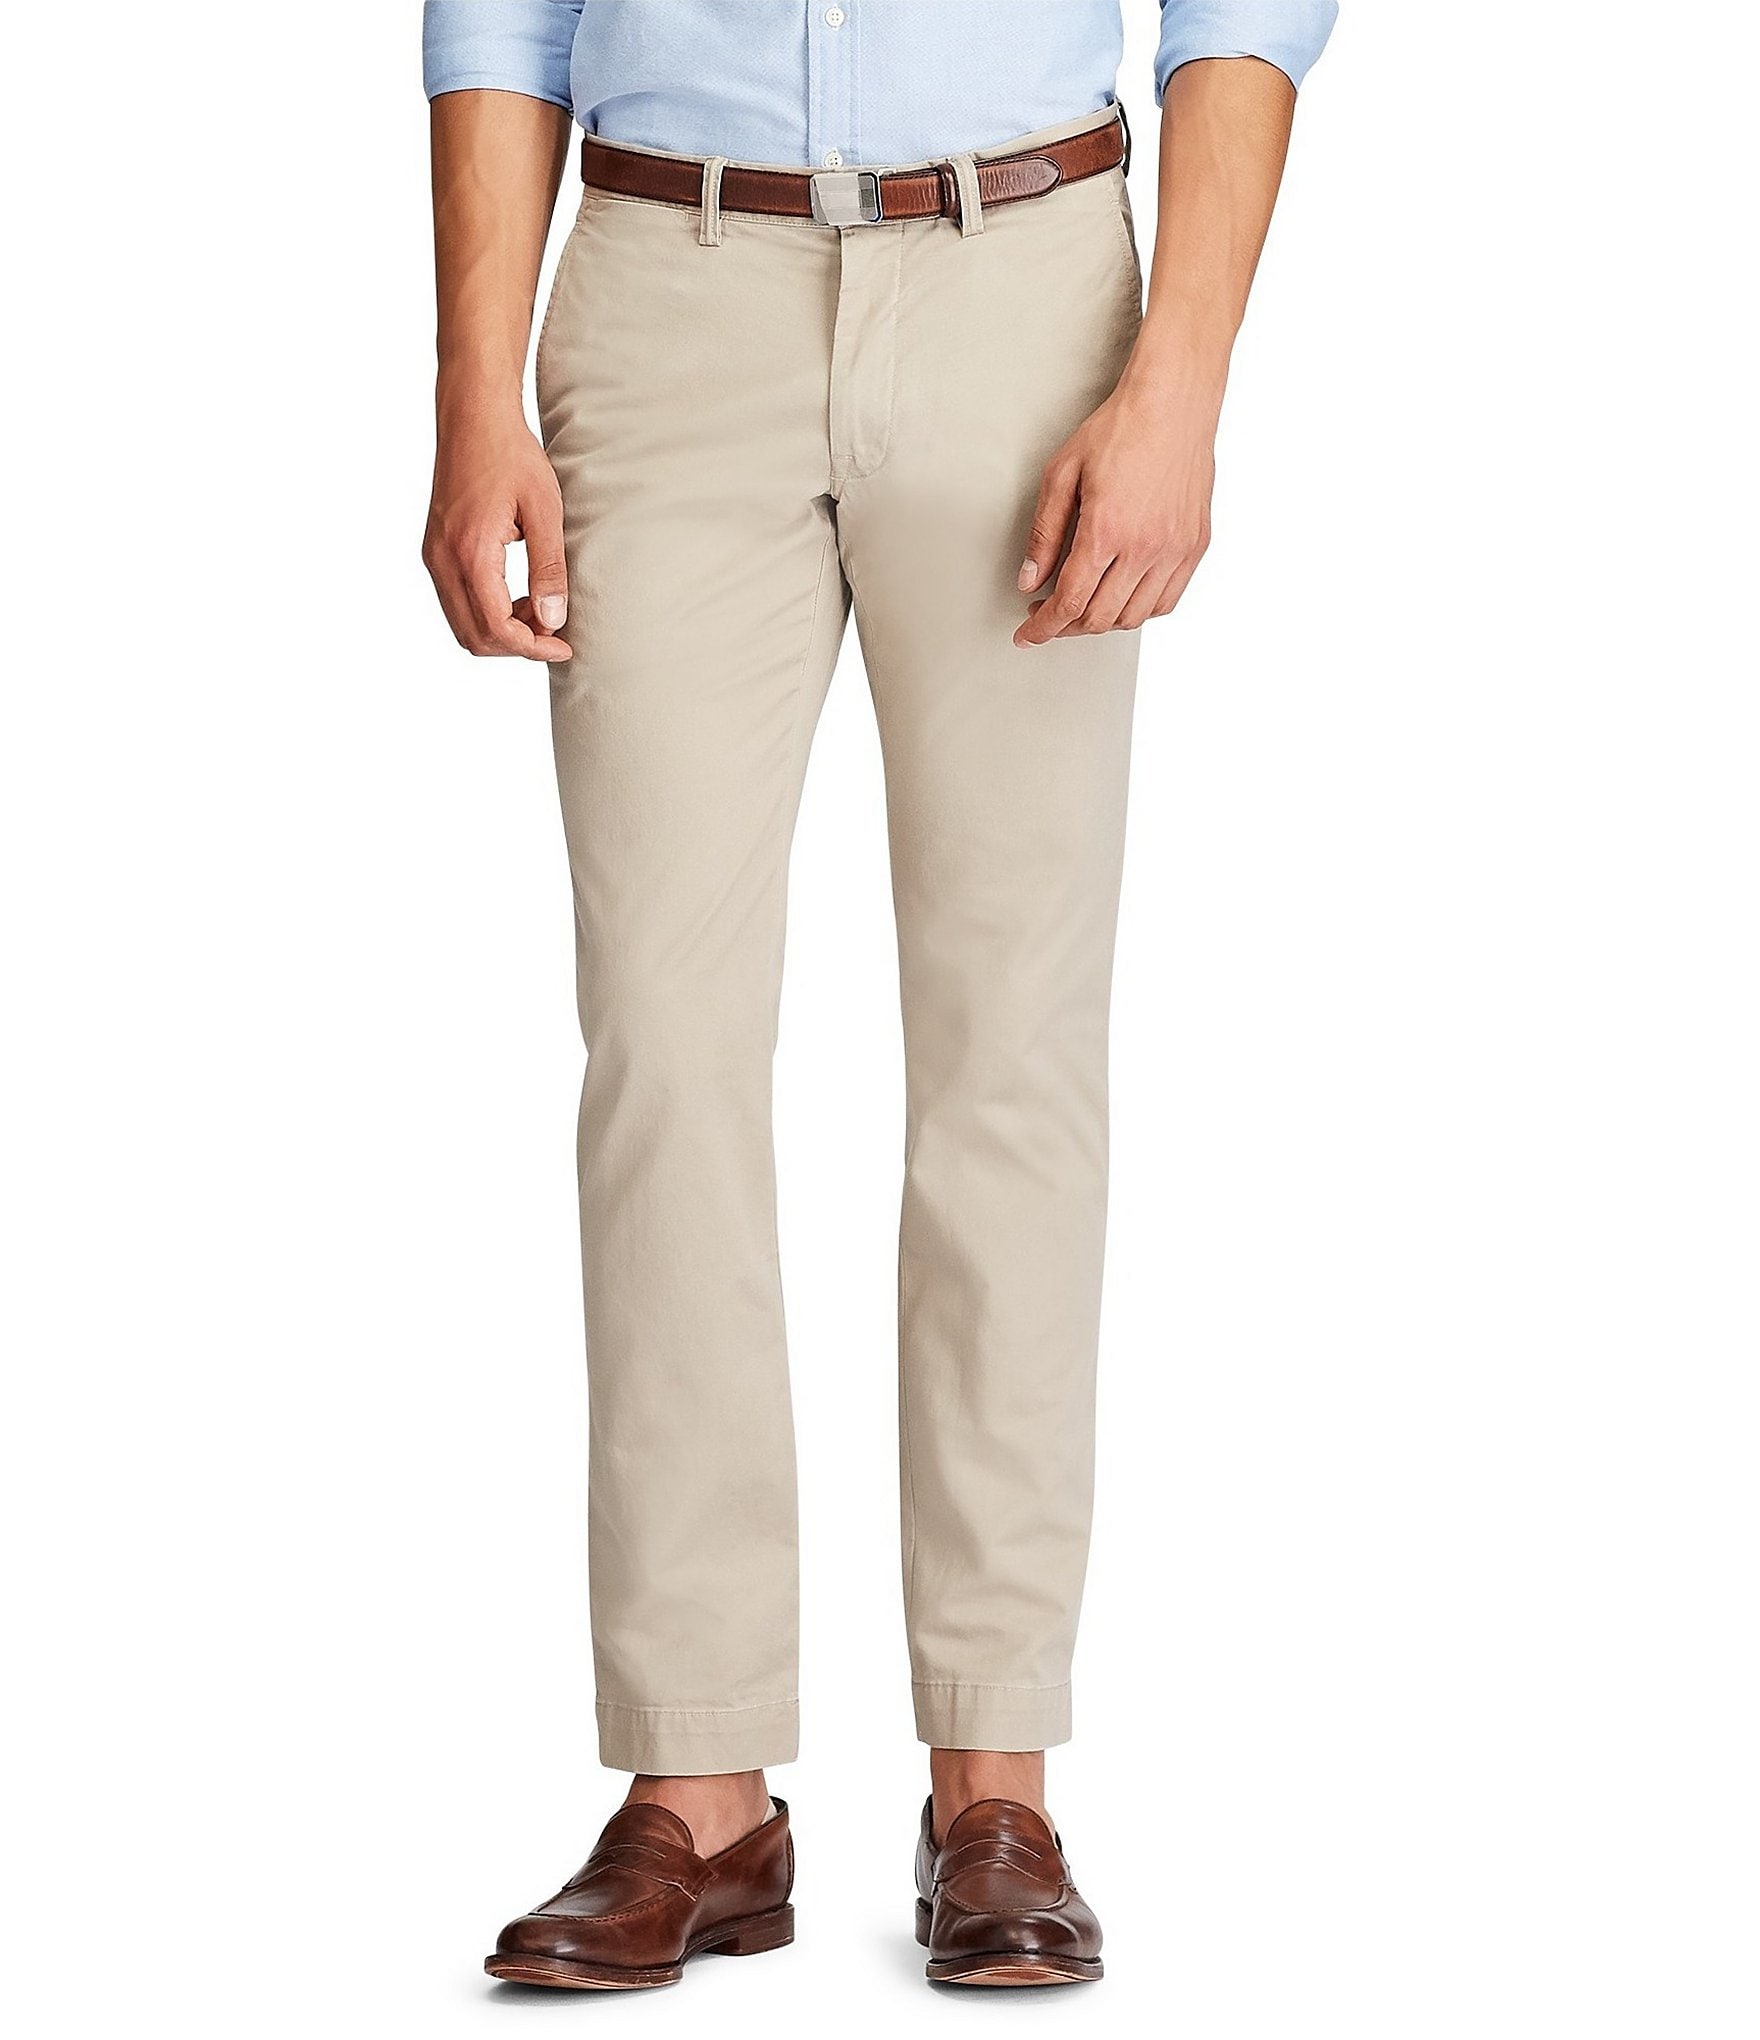 Akiihool Men's Casual Pants Big And Tall Men's Big and Tall Stretch  Crosshatch Pleated Pant Outfits (Khaki,M) - Walmart.com